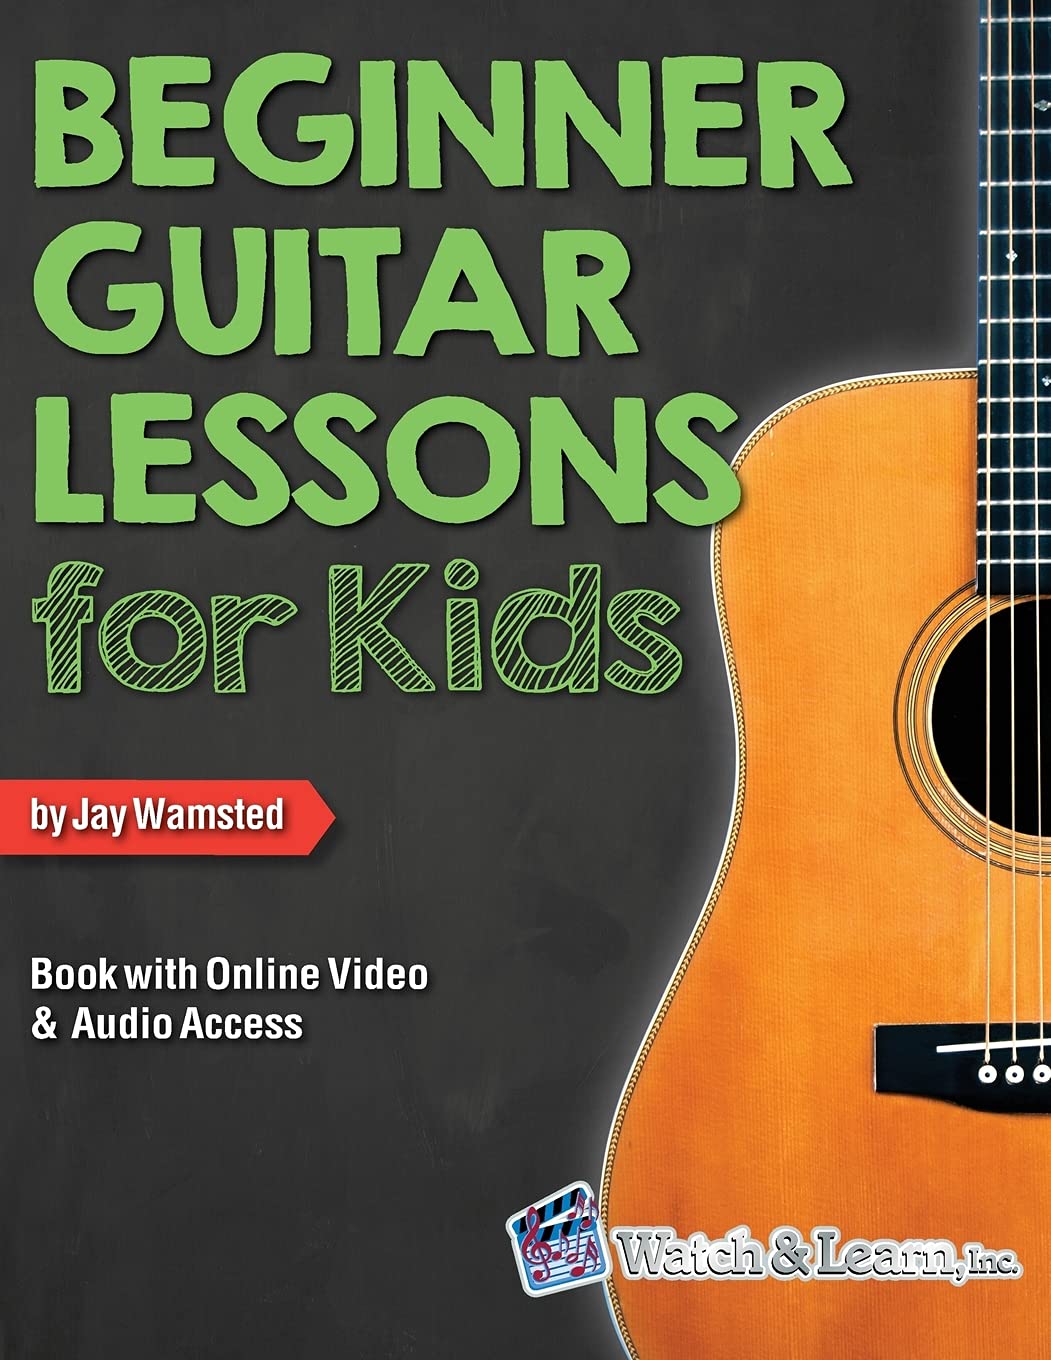 Beginner Guitar Lessons for Kids Book with Online Video and Audio Access Jay Wamsted-Stumbit Kids